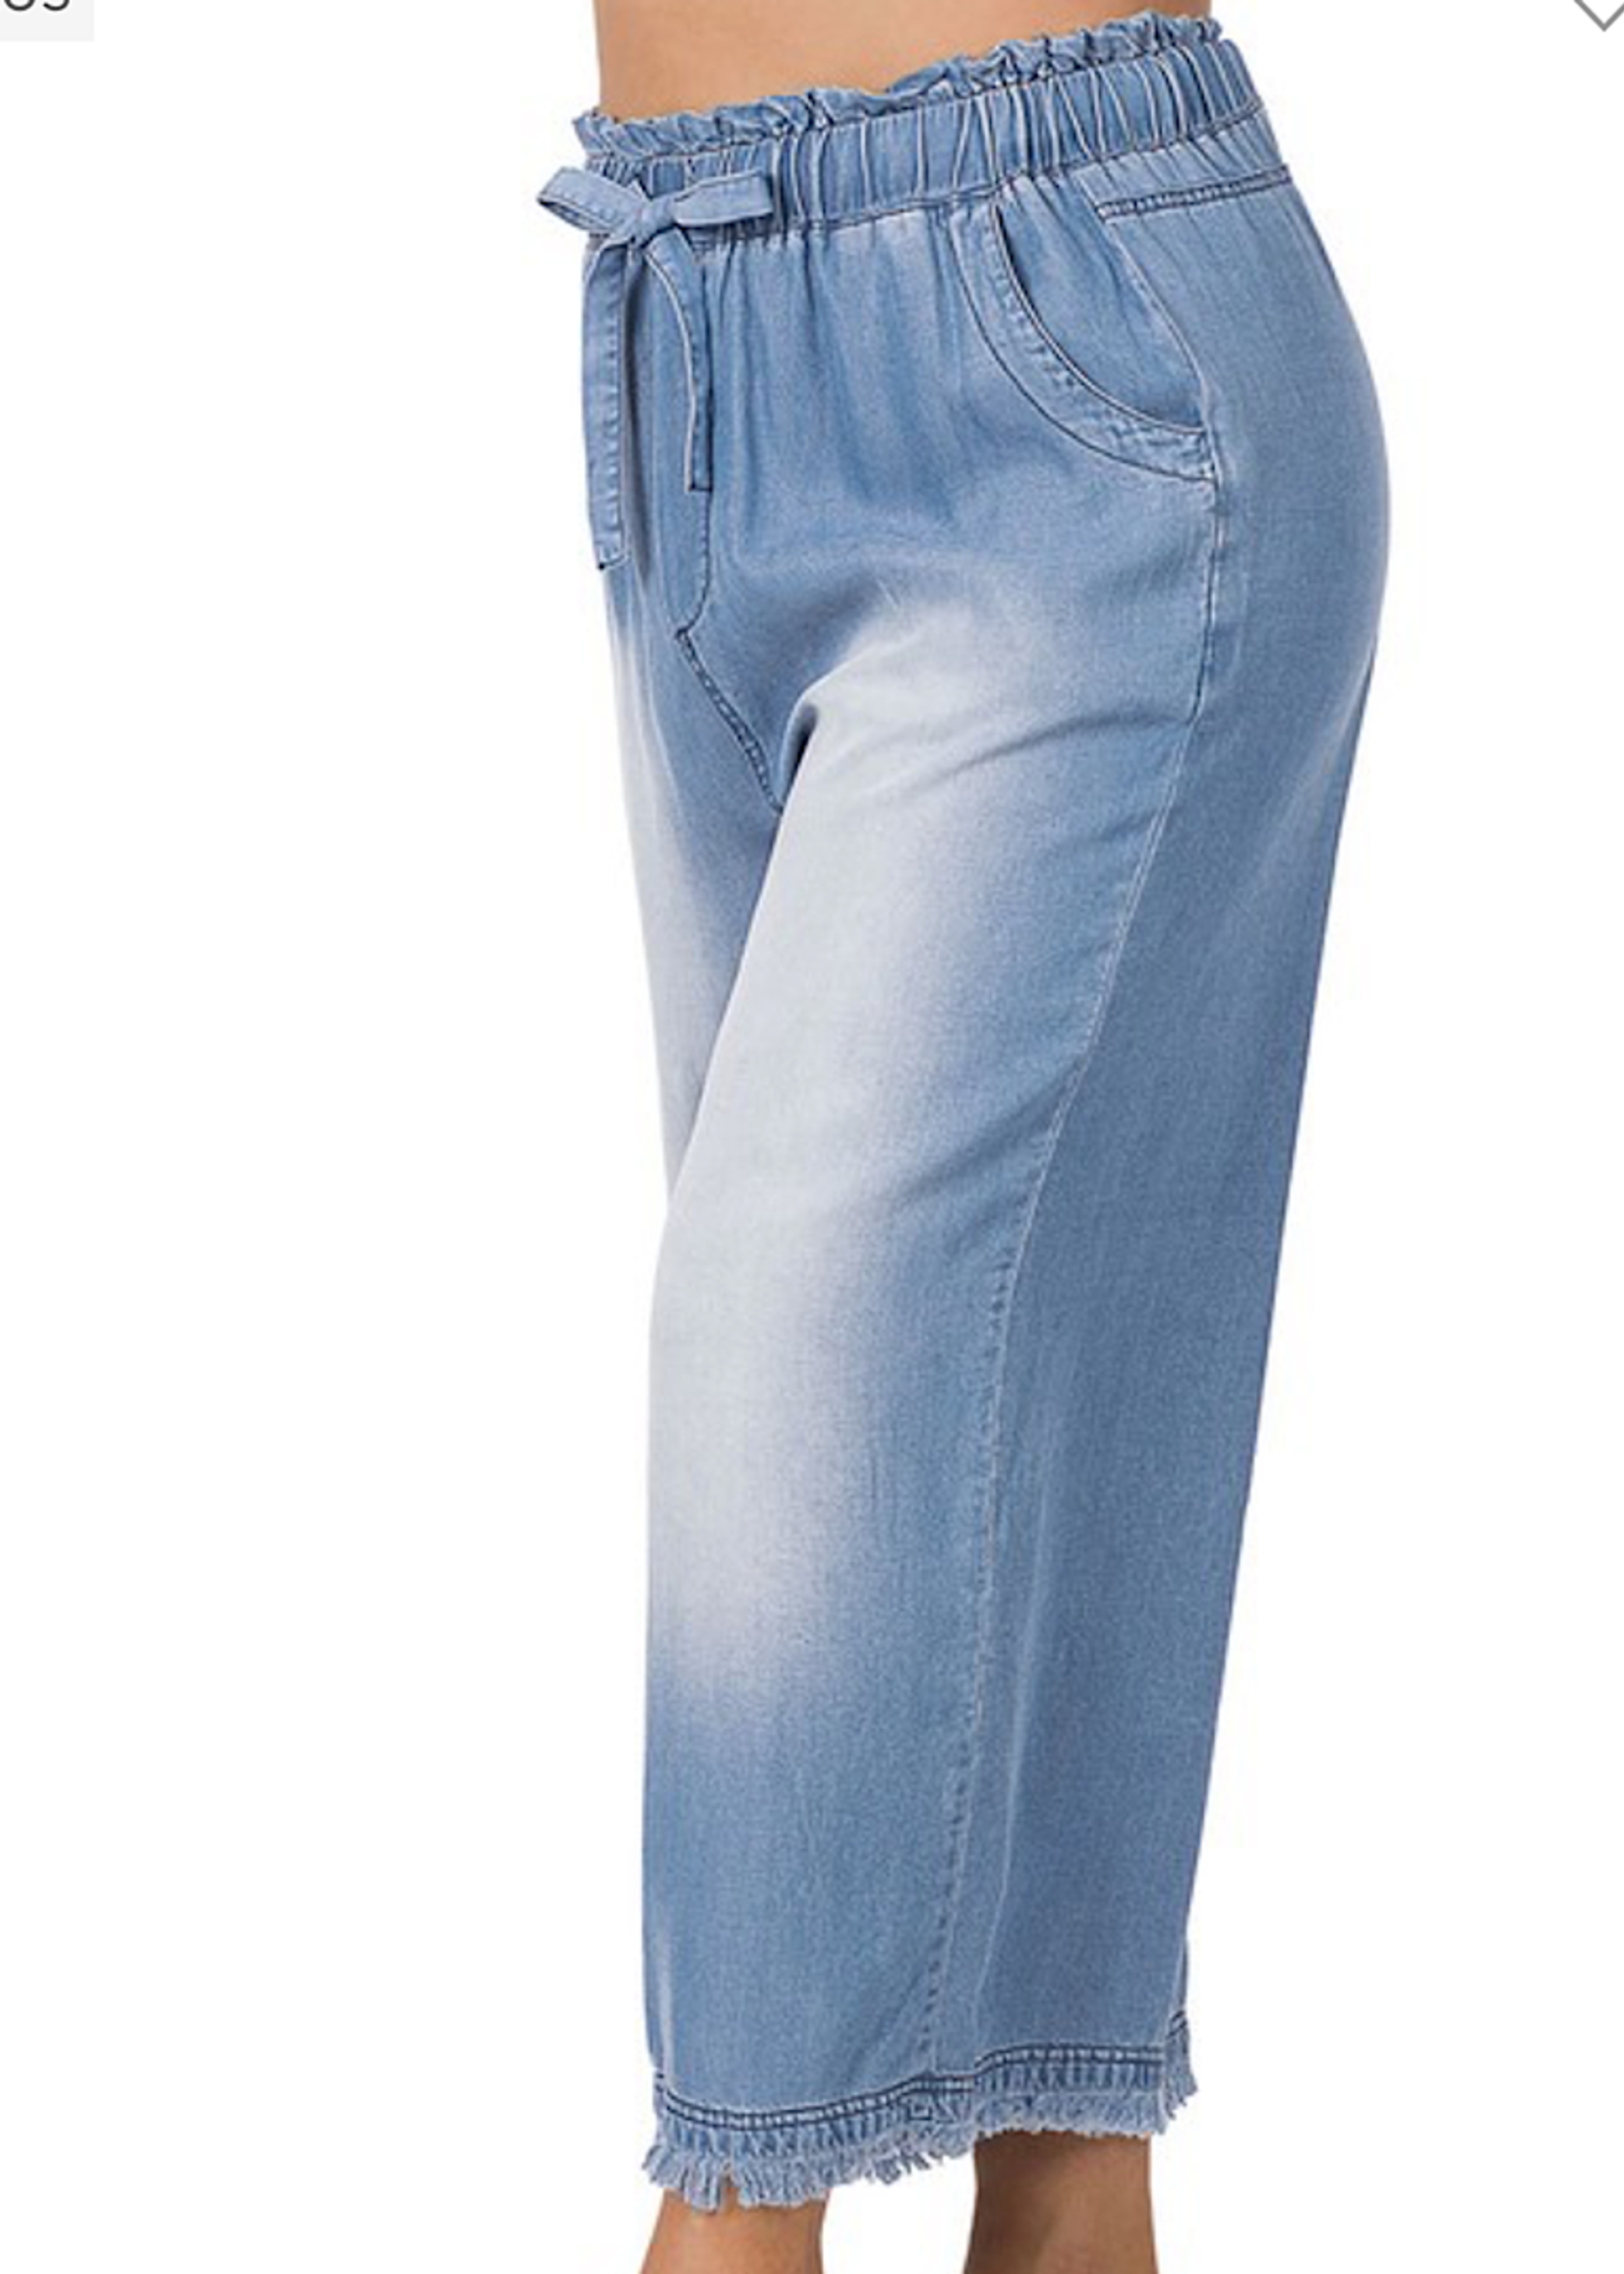 Chambray Crop Pant in Blue